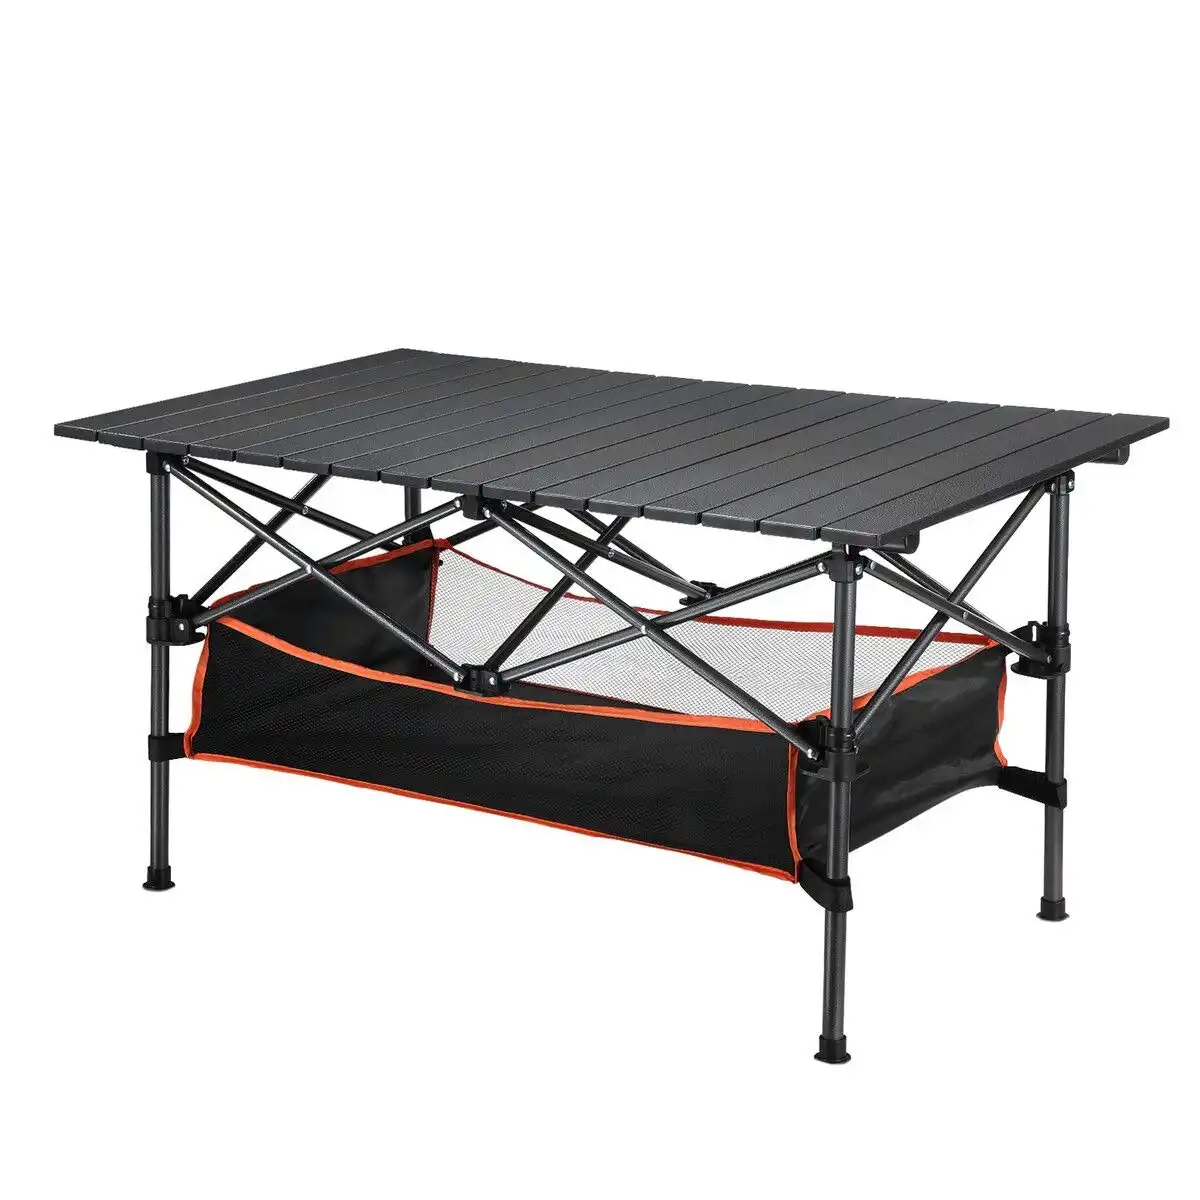 OGL Folding Camping Table Portable Picnic Outdoor Foldable Desk Aluminium with Storage Carry Bag